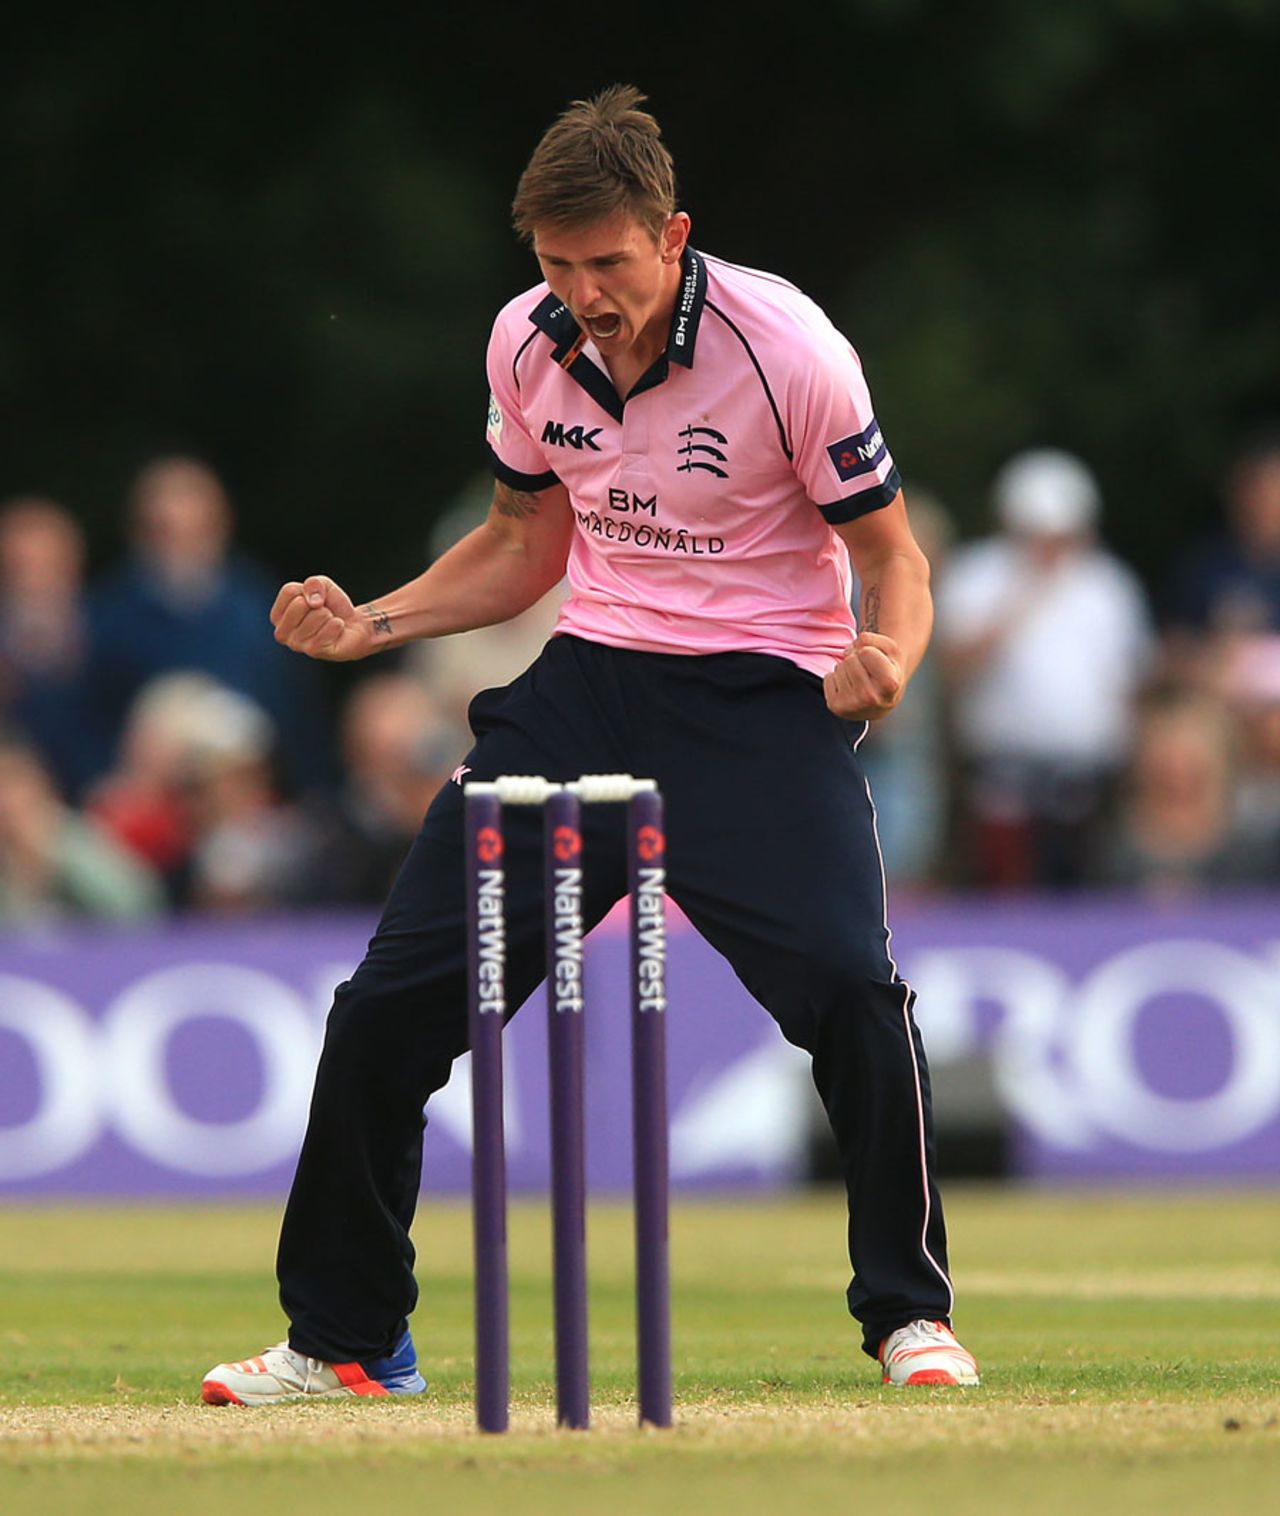 Harry Podmore celebrates a wicket, Middlesex v Hampshire, NatWest T20 Blast, South Group, Uxbridge, May 27, 2016